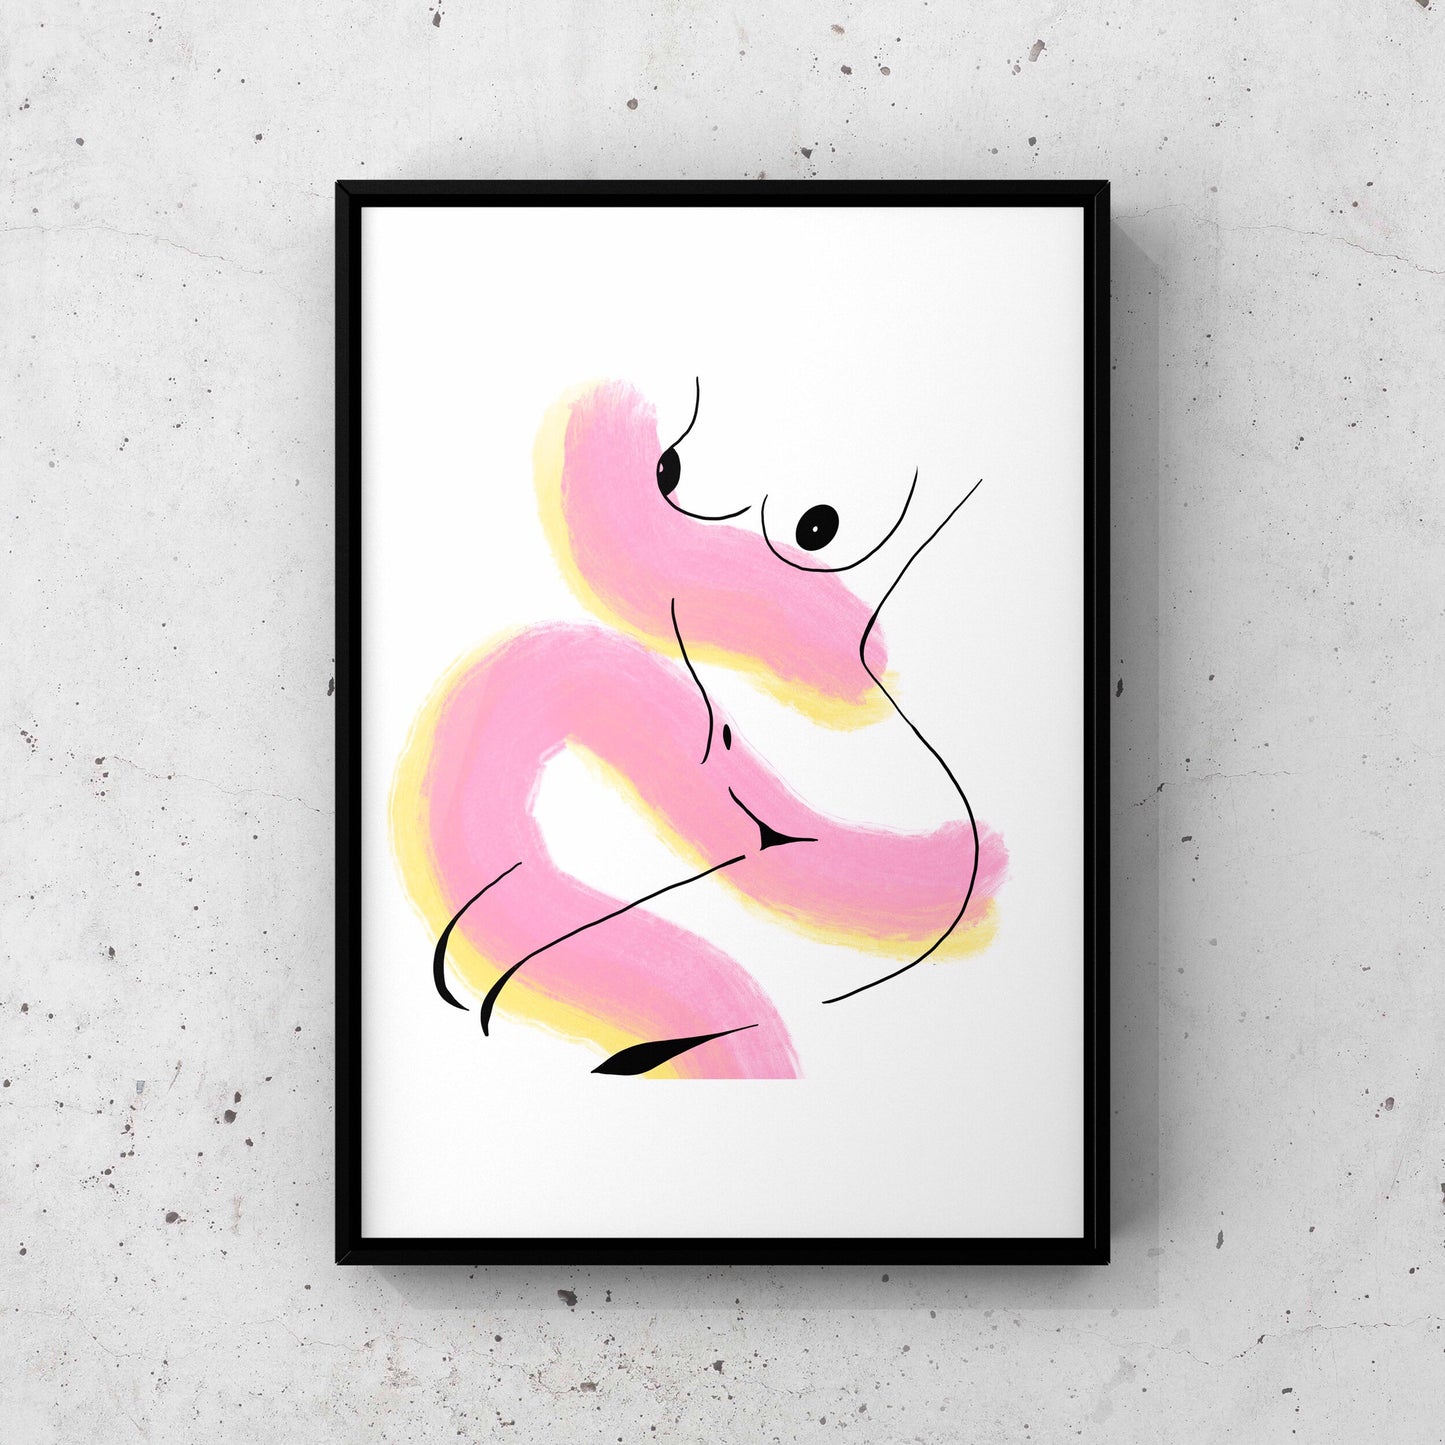 Inclusive Art | Wrapped in Colour | Art Print